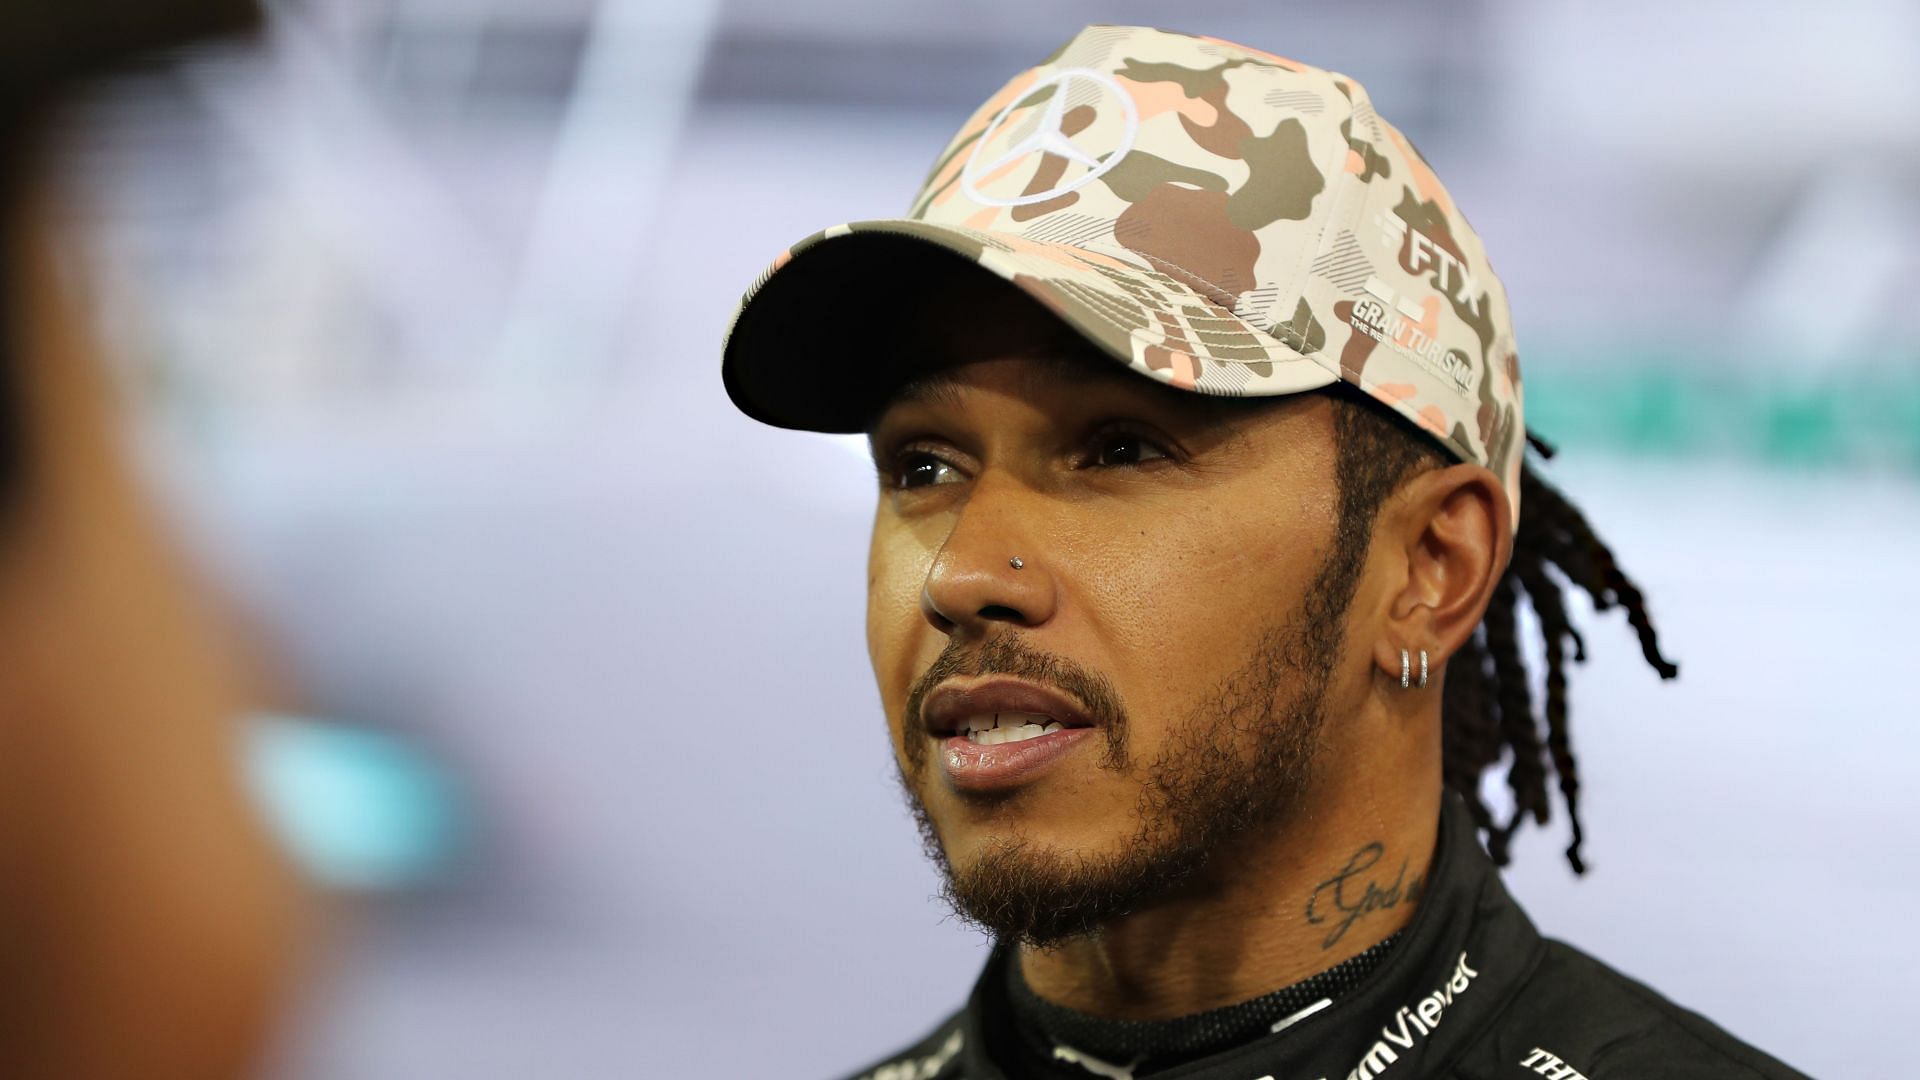 Lewis Hamilton qualified in second place for the 2021 Abu Dhabi Grand Prix